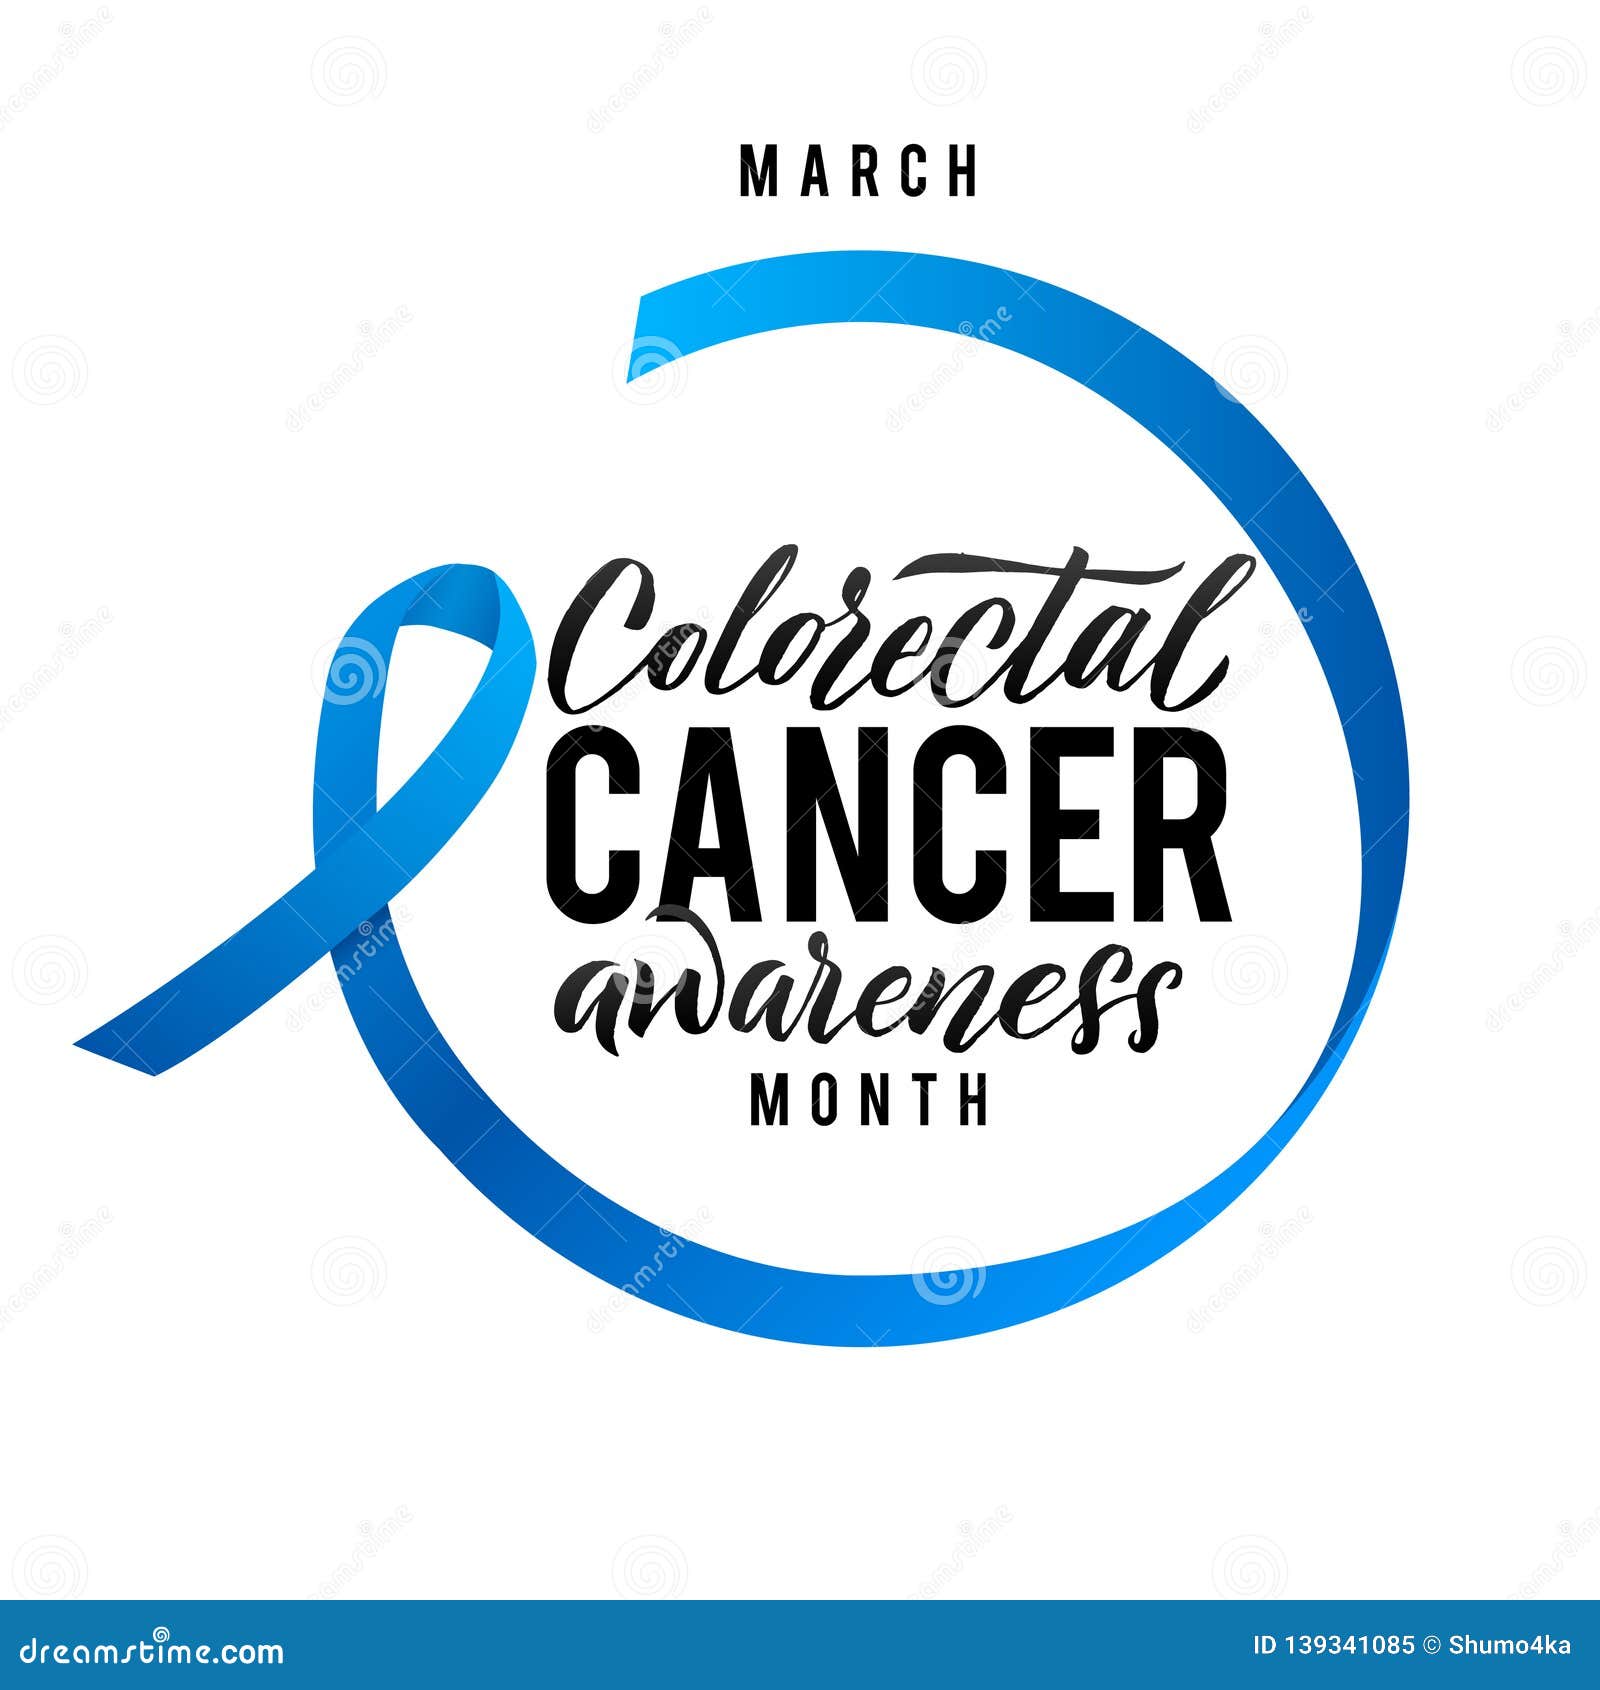 Colorectal Cancer Awareness Month Low Poly Ribbon Vector Illustration ...